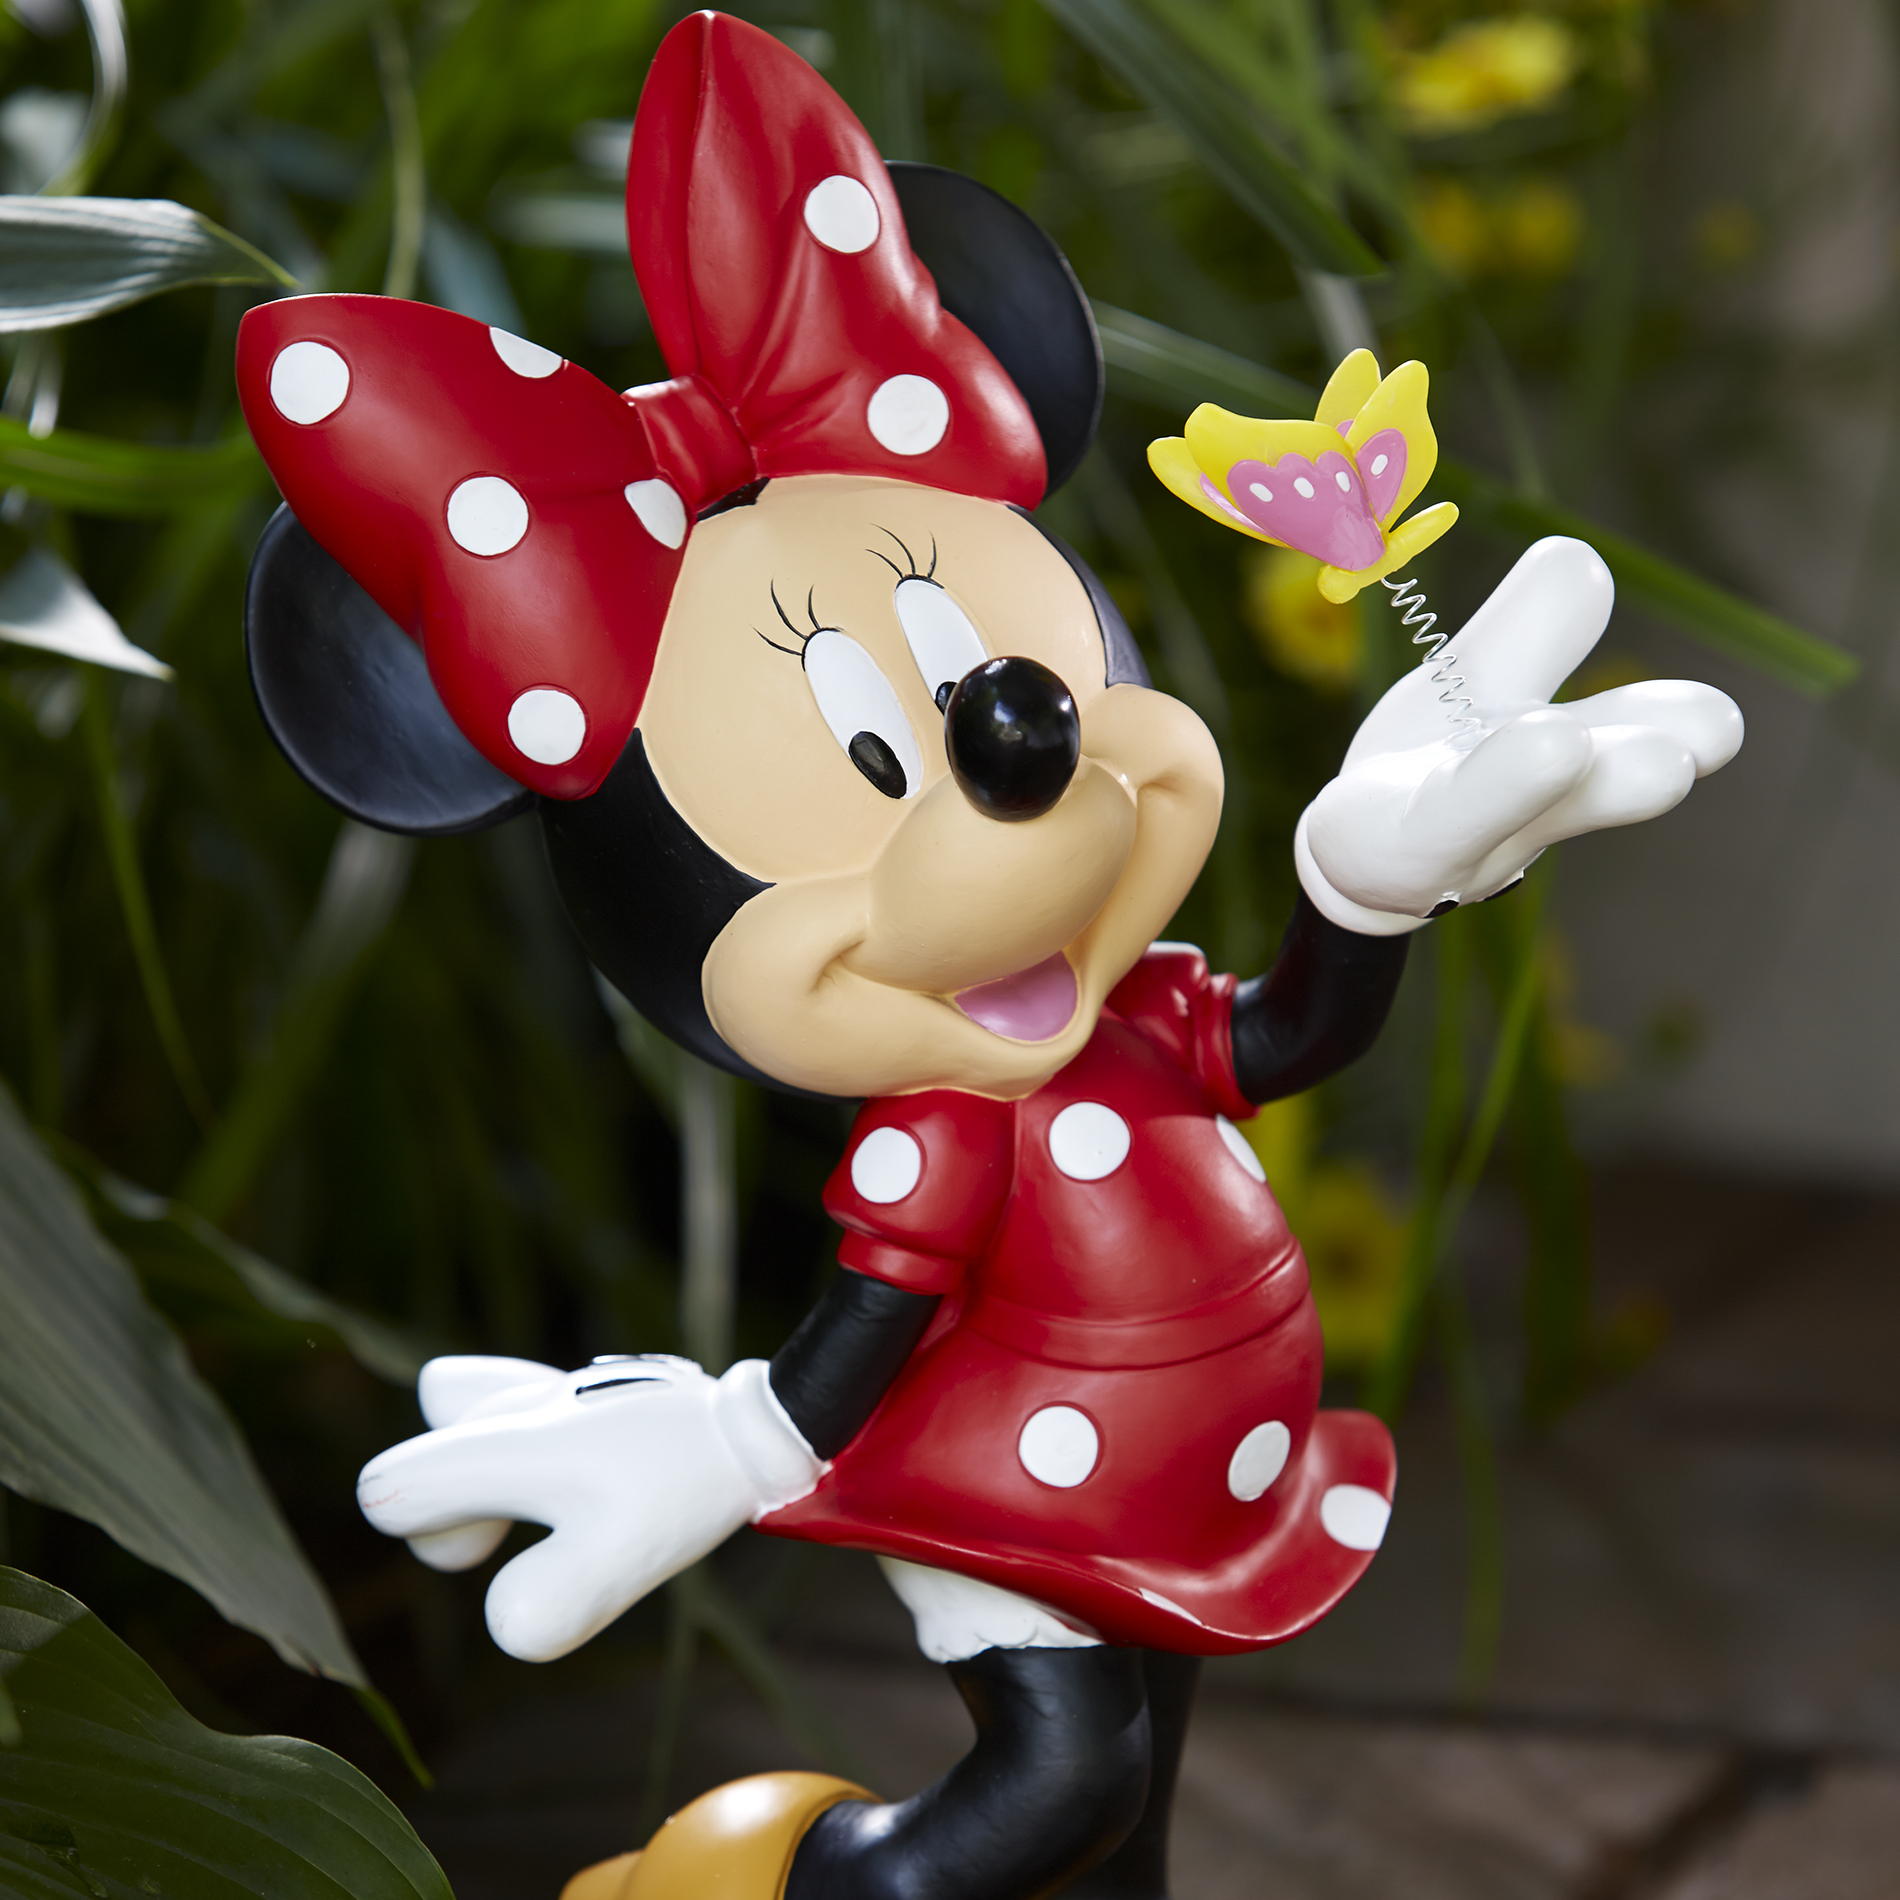 Disney Minnie Mouse Statue Outdoor Living Outdoor